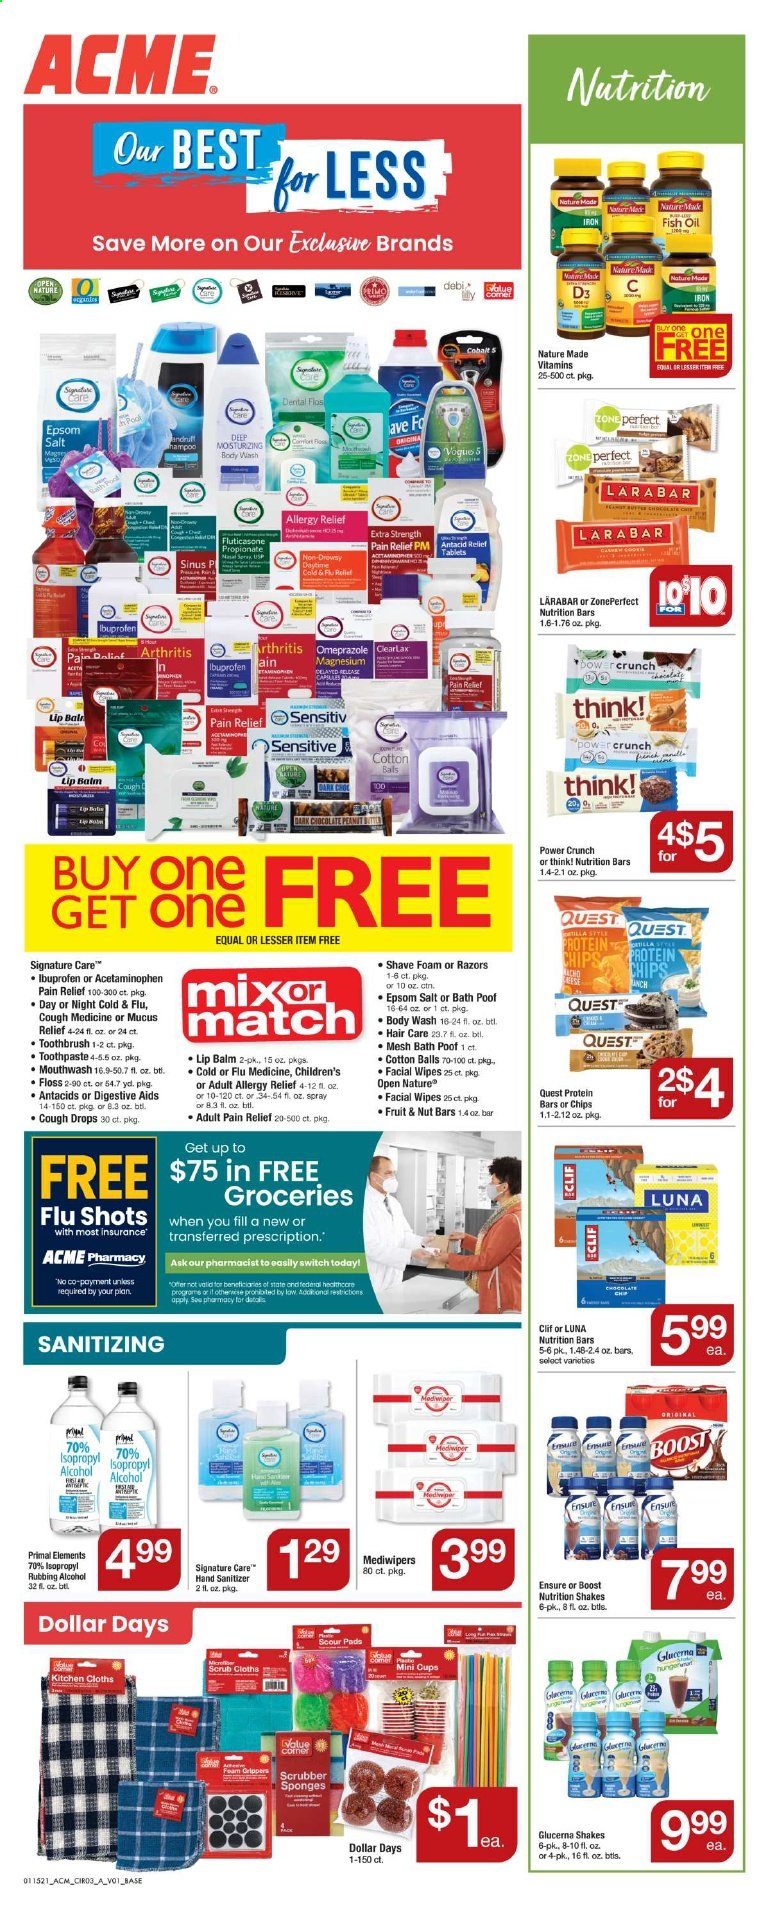 thumbnail - ACME Flyer - 01/15/2021 - 01/21/2021 - Sales products - shake, Digestive, chips, salt, nutrition bar, protein bar, nut bar, Zone Perfect, fish oil, Boost, cotton balls, wipes, body wash, toothbrush, toothpaste, mouthwash, lip balm, hand sanitizer, sponge, Primal, pain relief, Cold & Flu, magnesium, Nature Made, Ibuprofen, Glucerna, vitamin D3, cough drops, allergy relief. Page 4.